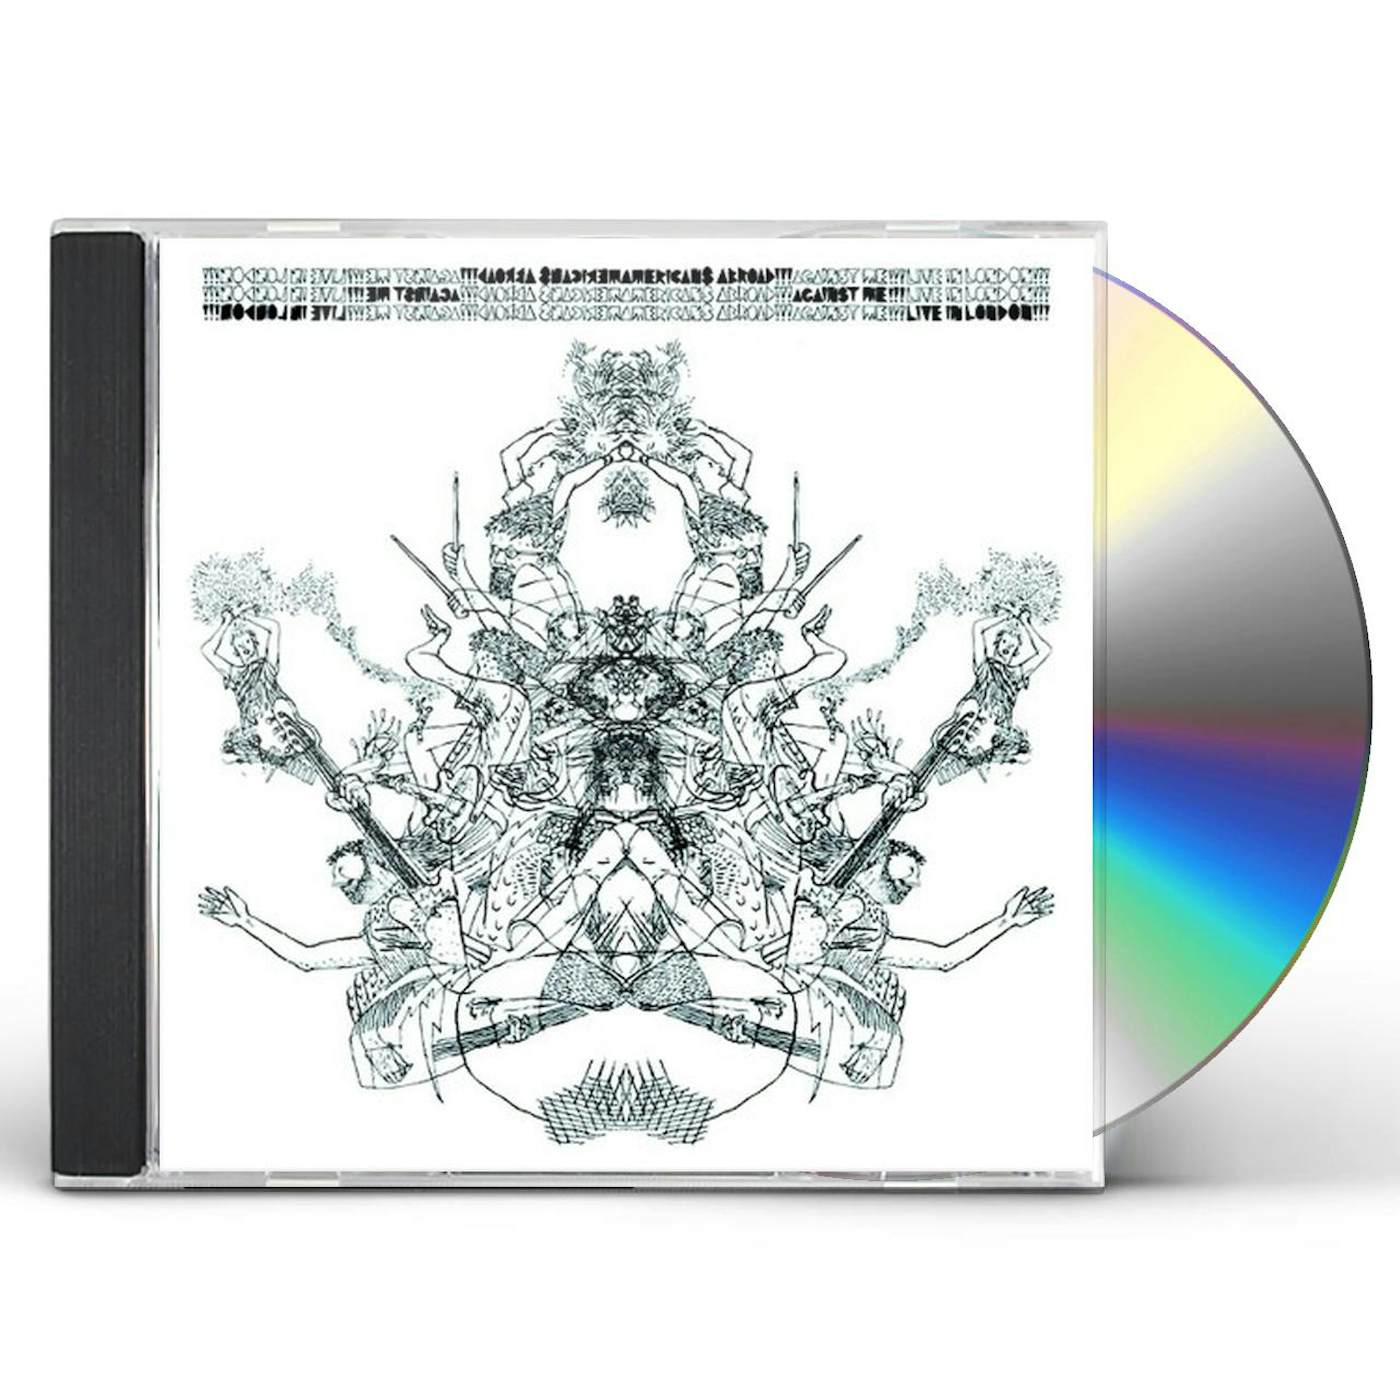 AMERICANS ABROAD Against Me! LIVE IN LONDON CD